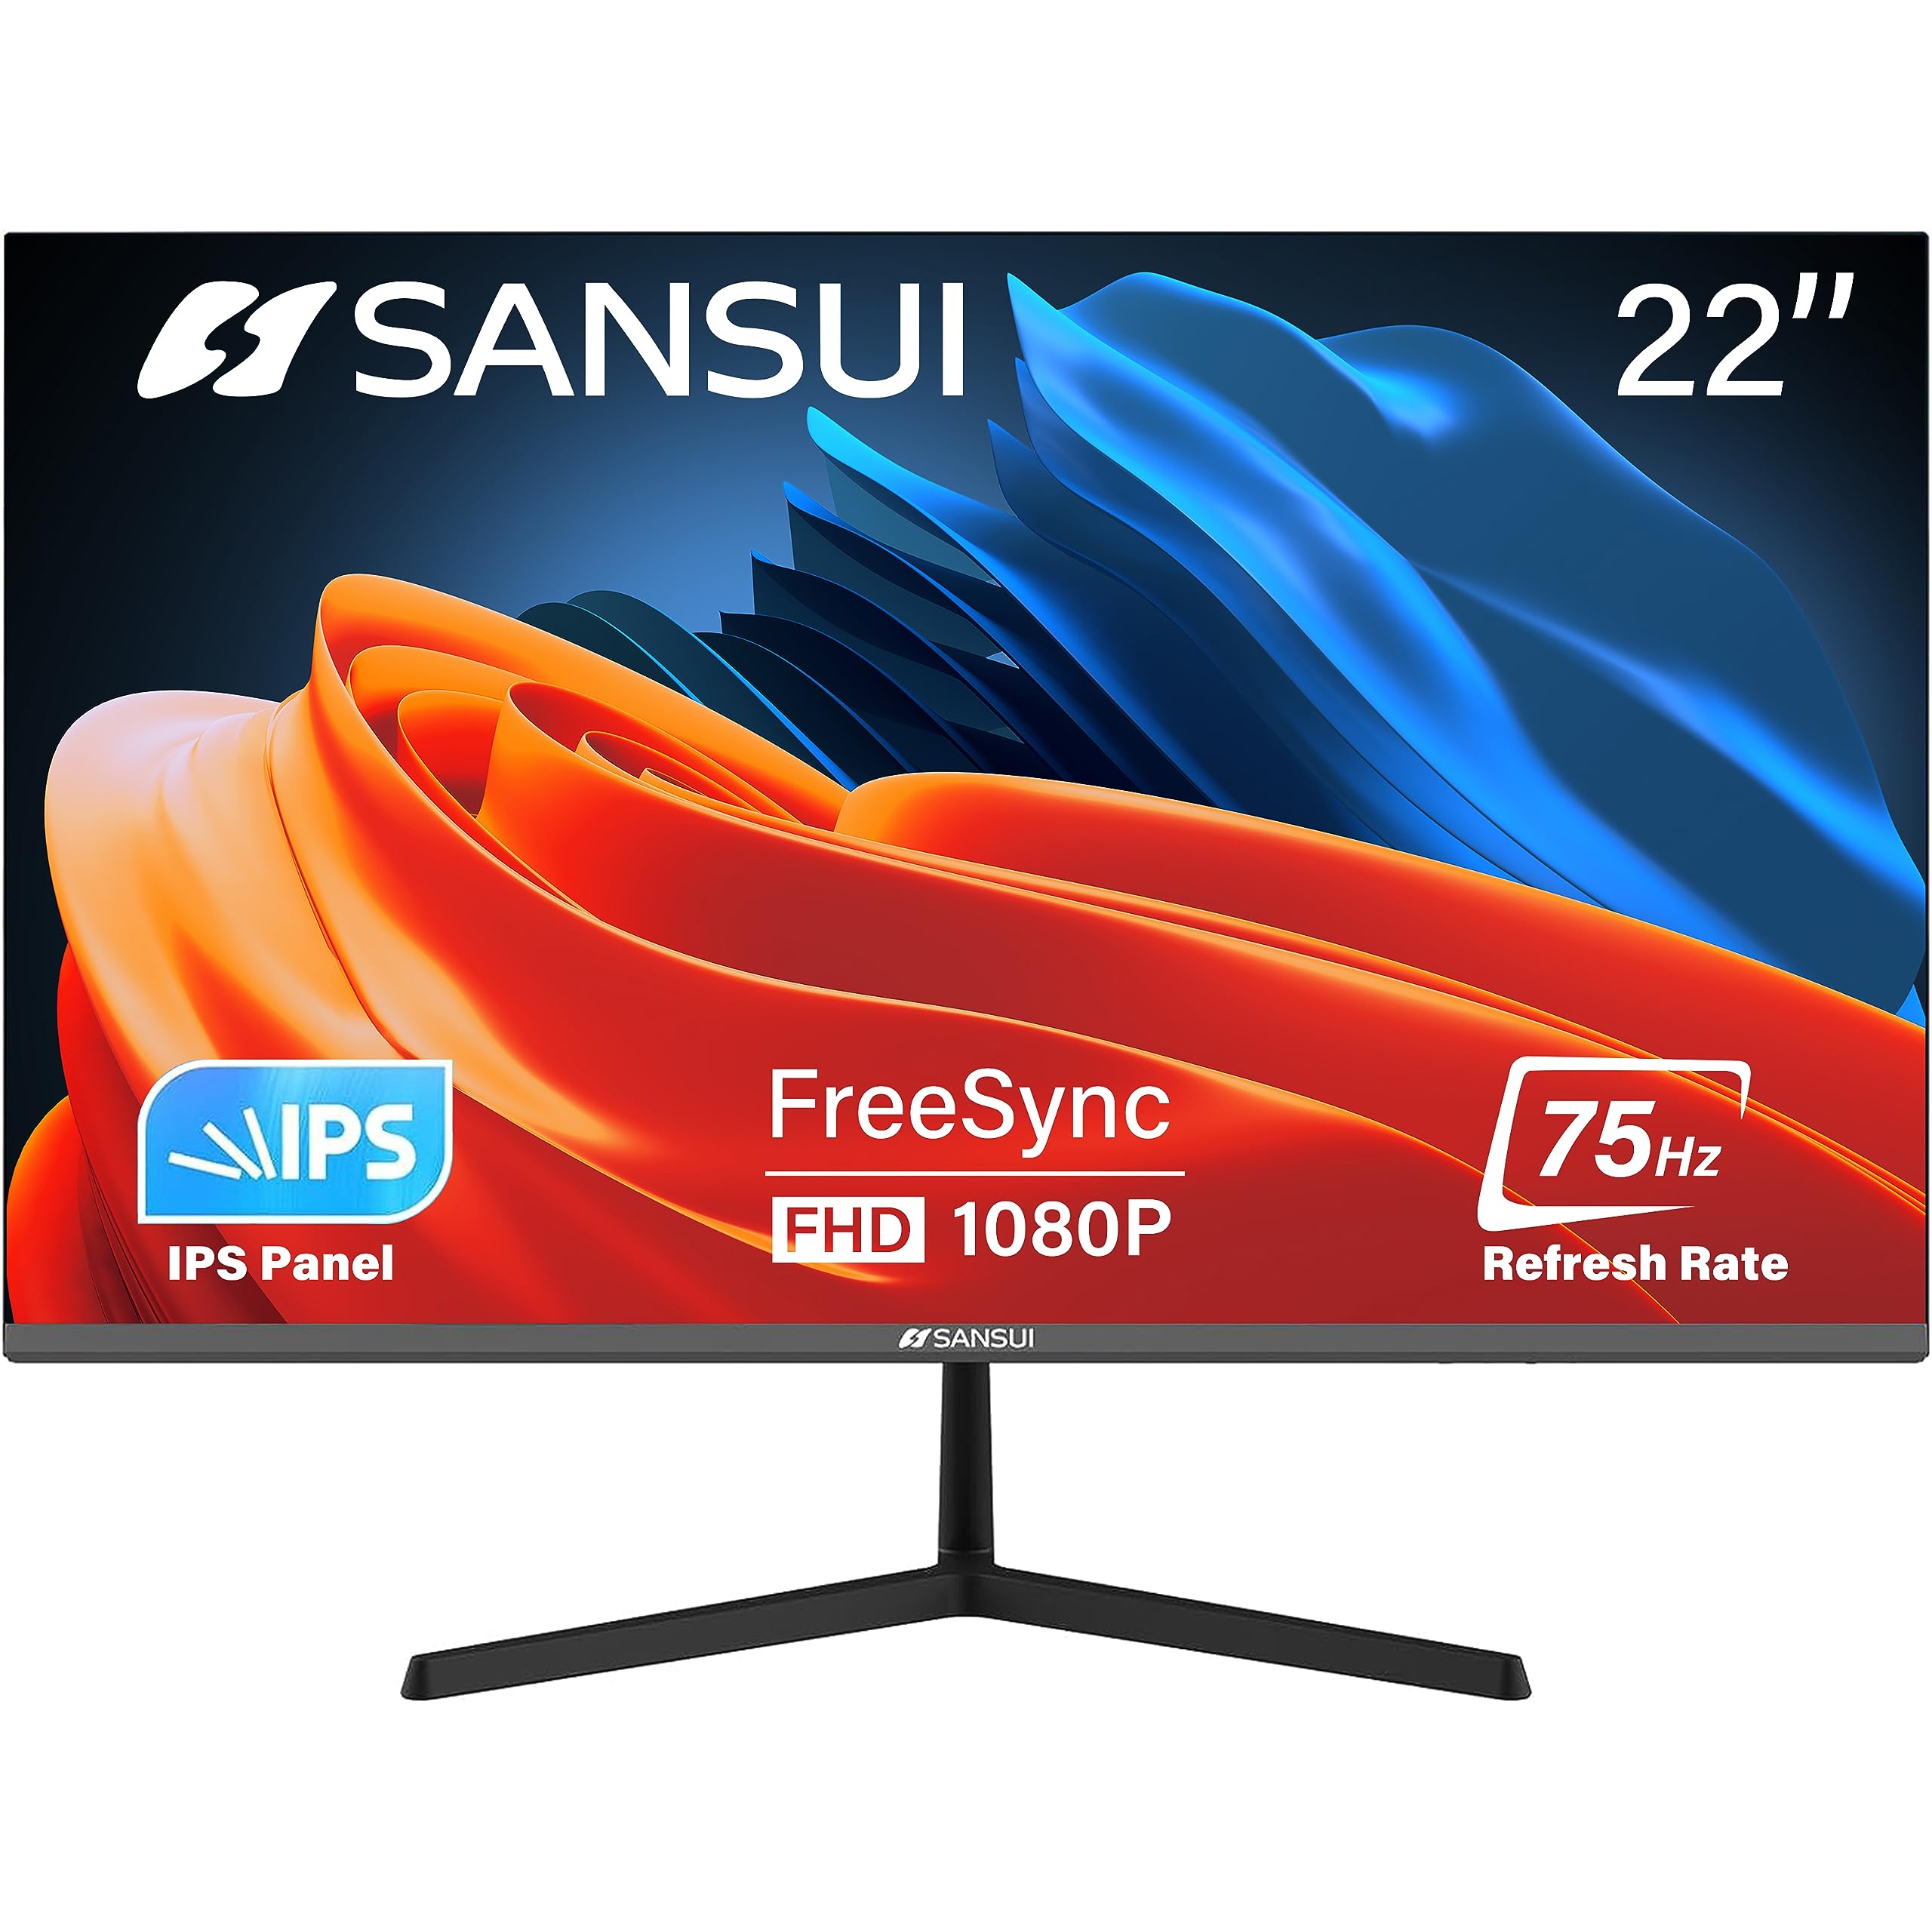 Simple Deluxe Monitor 22 Inch IPS 75Hz FHD 1080P HDMI VGA Ports Computer Monitor Ultra-Thin Tilt Adjustable VESA Mount Compatible with Eye Comfort 178° Wide Viewing Angle SANSUI (ES-22X3)